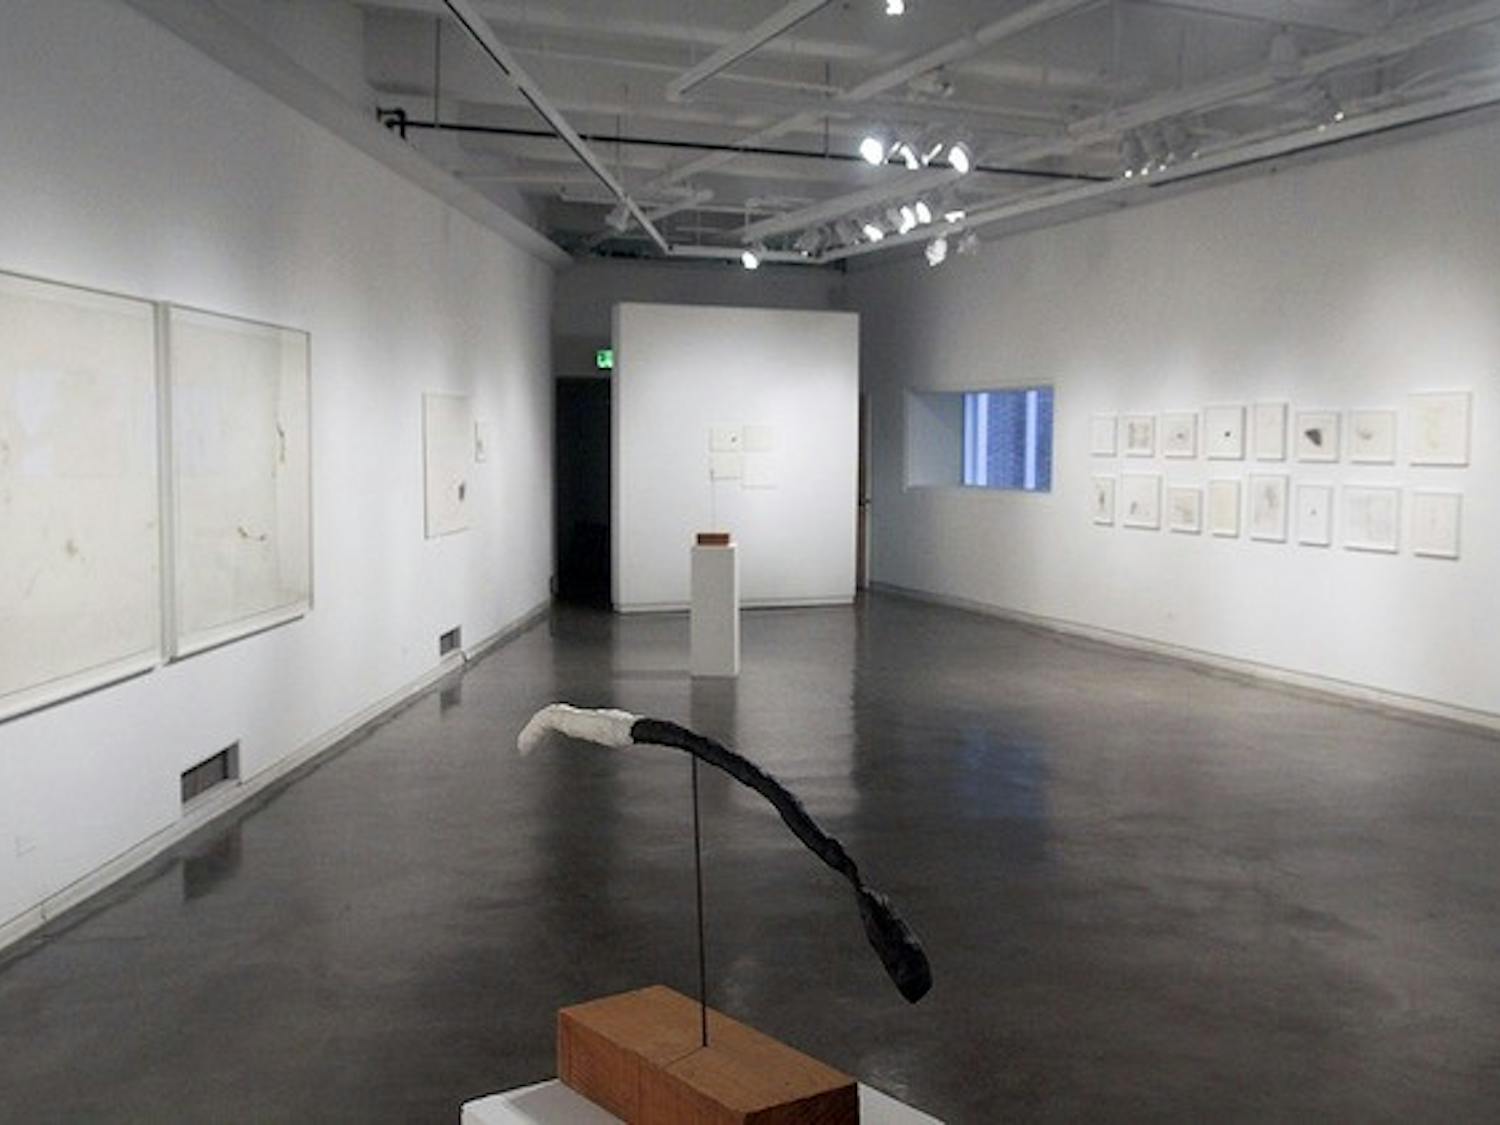 Artist-in-residence Linda Matalon recently opened her ninth individual exhibition.